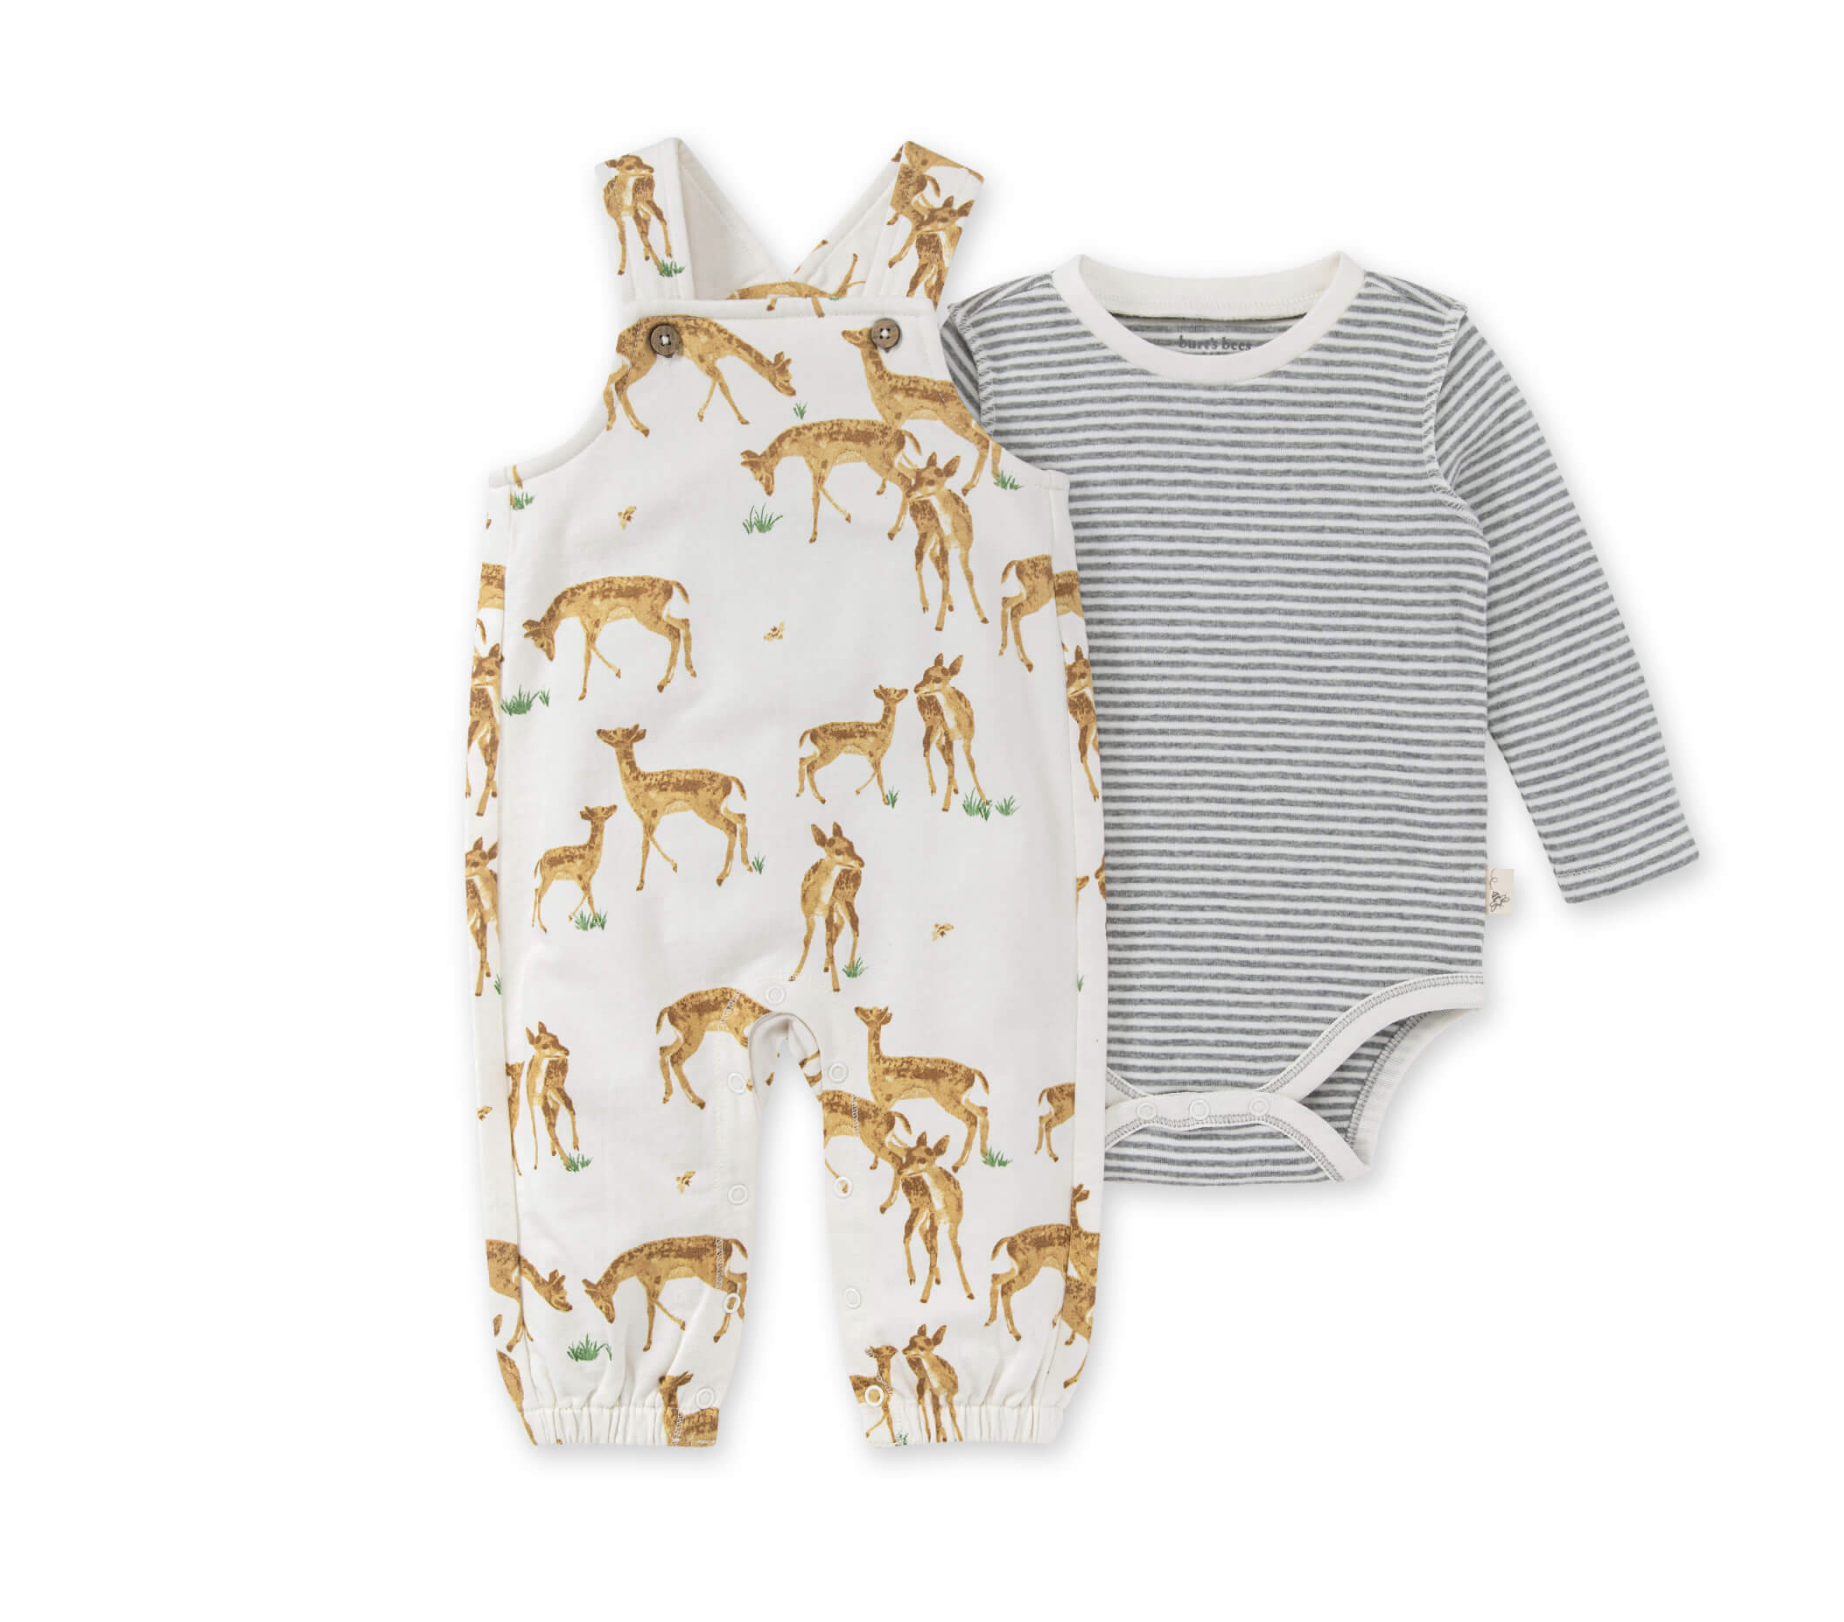 Best Baby Clothing Brands Burts Bees Jumpsuit and Bodysuit set with deers